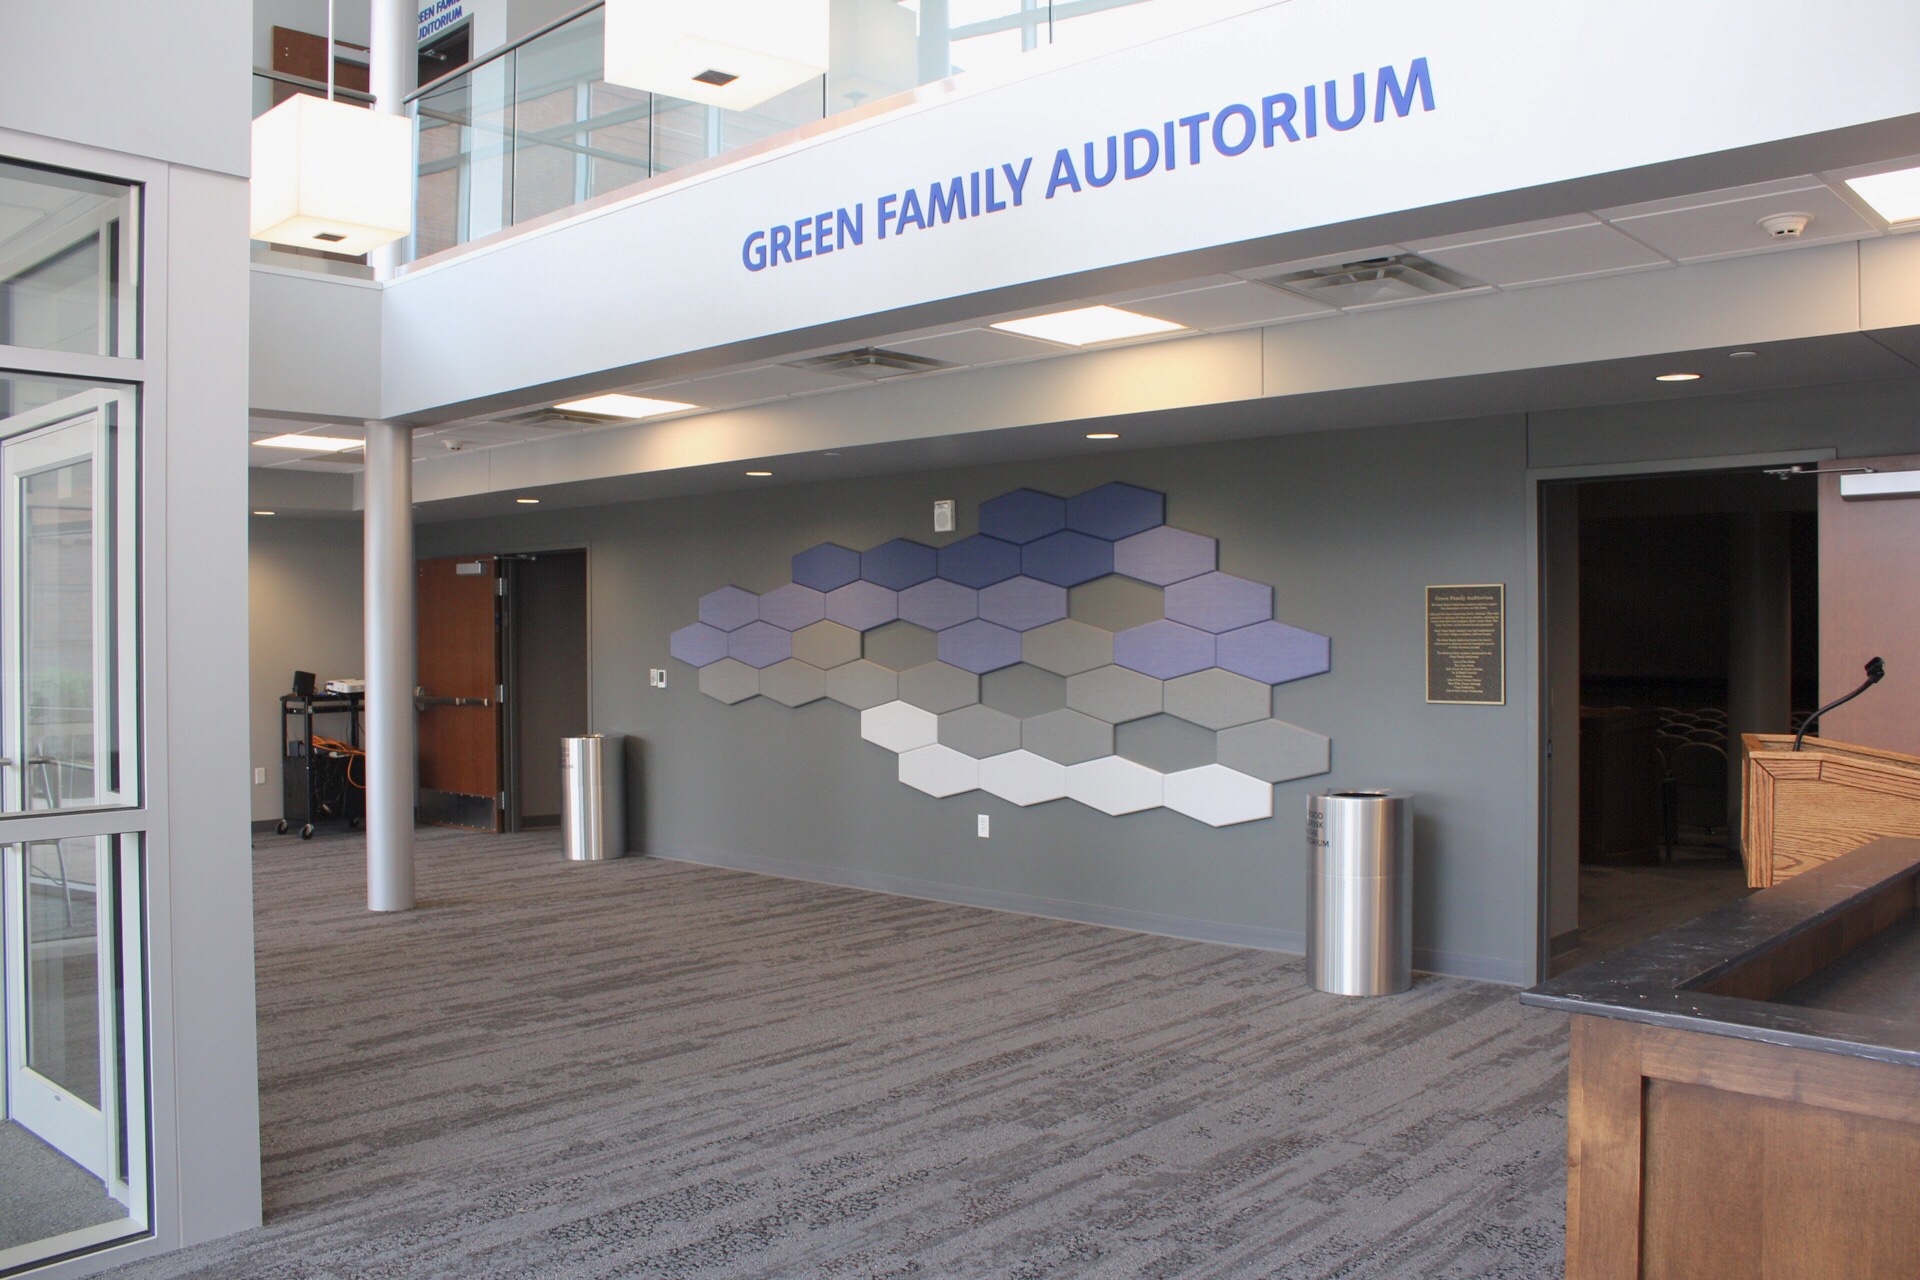 View of the Performing Arts Center lobby with donor plaques on the wall and Green Family Auditorium near the entrance to the auditorium.